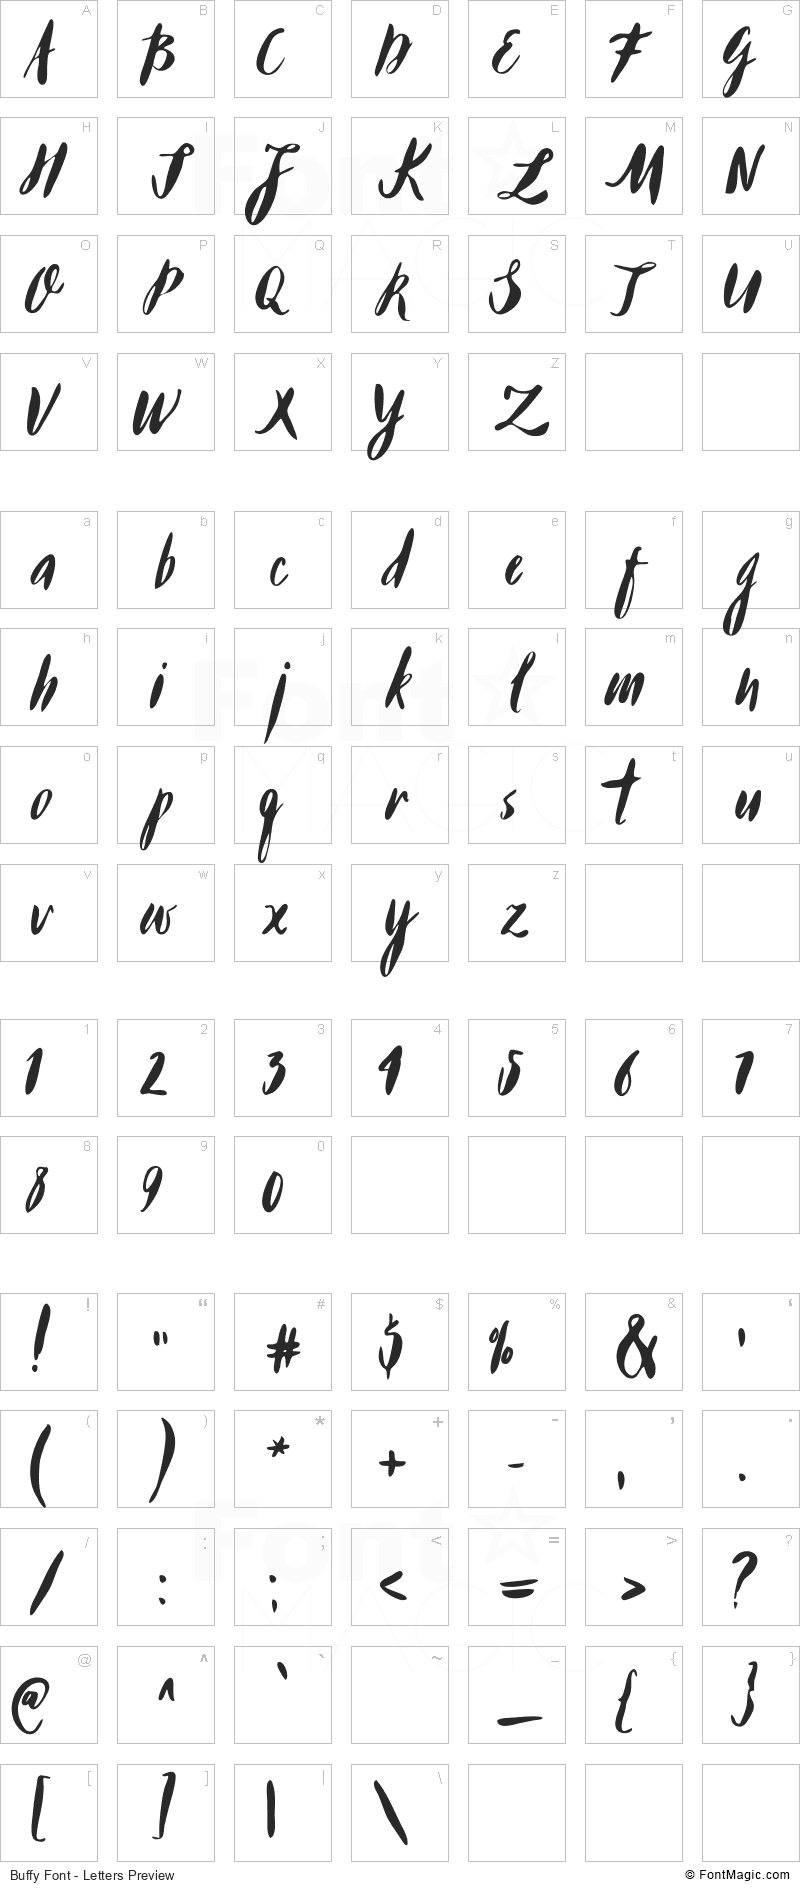 Buffy Font - All Latters Preview Chart